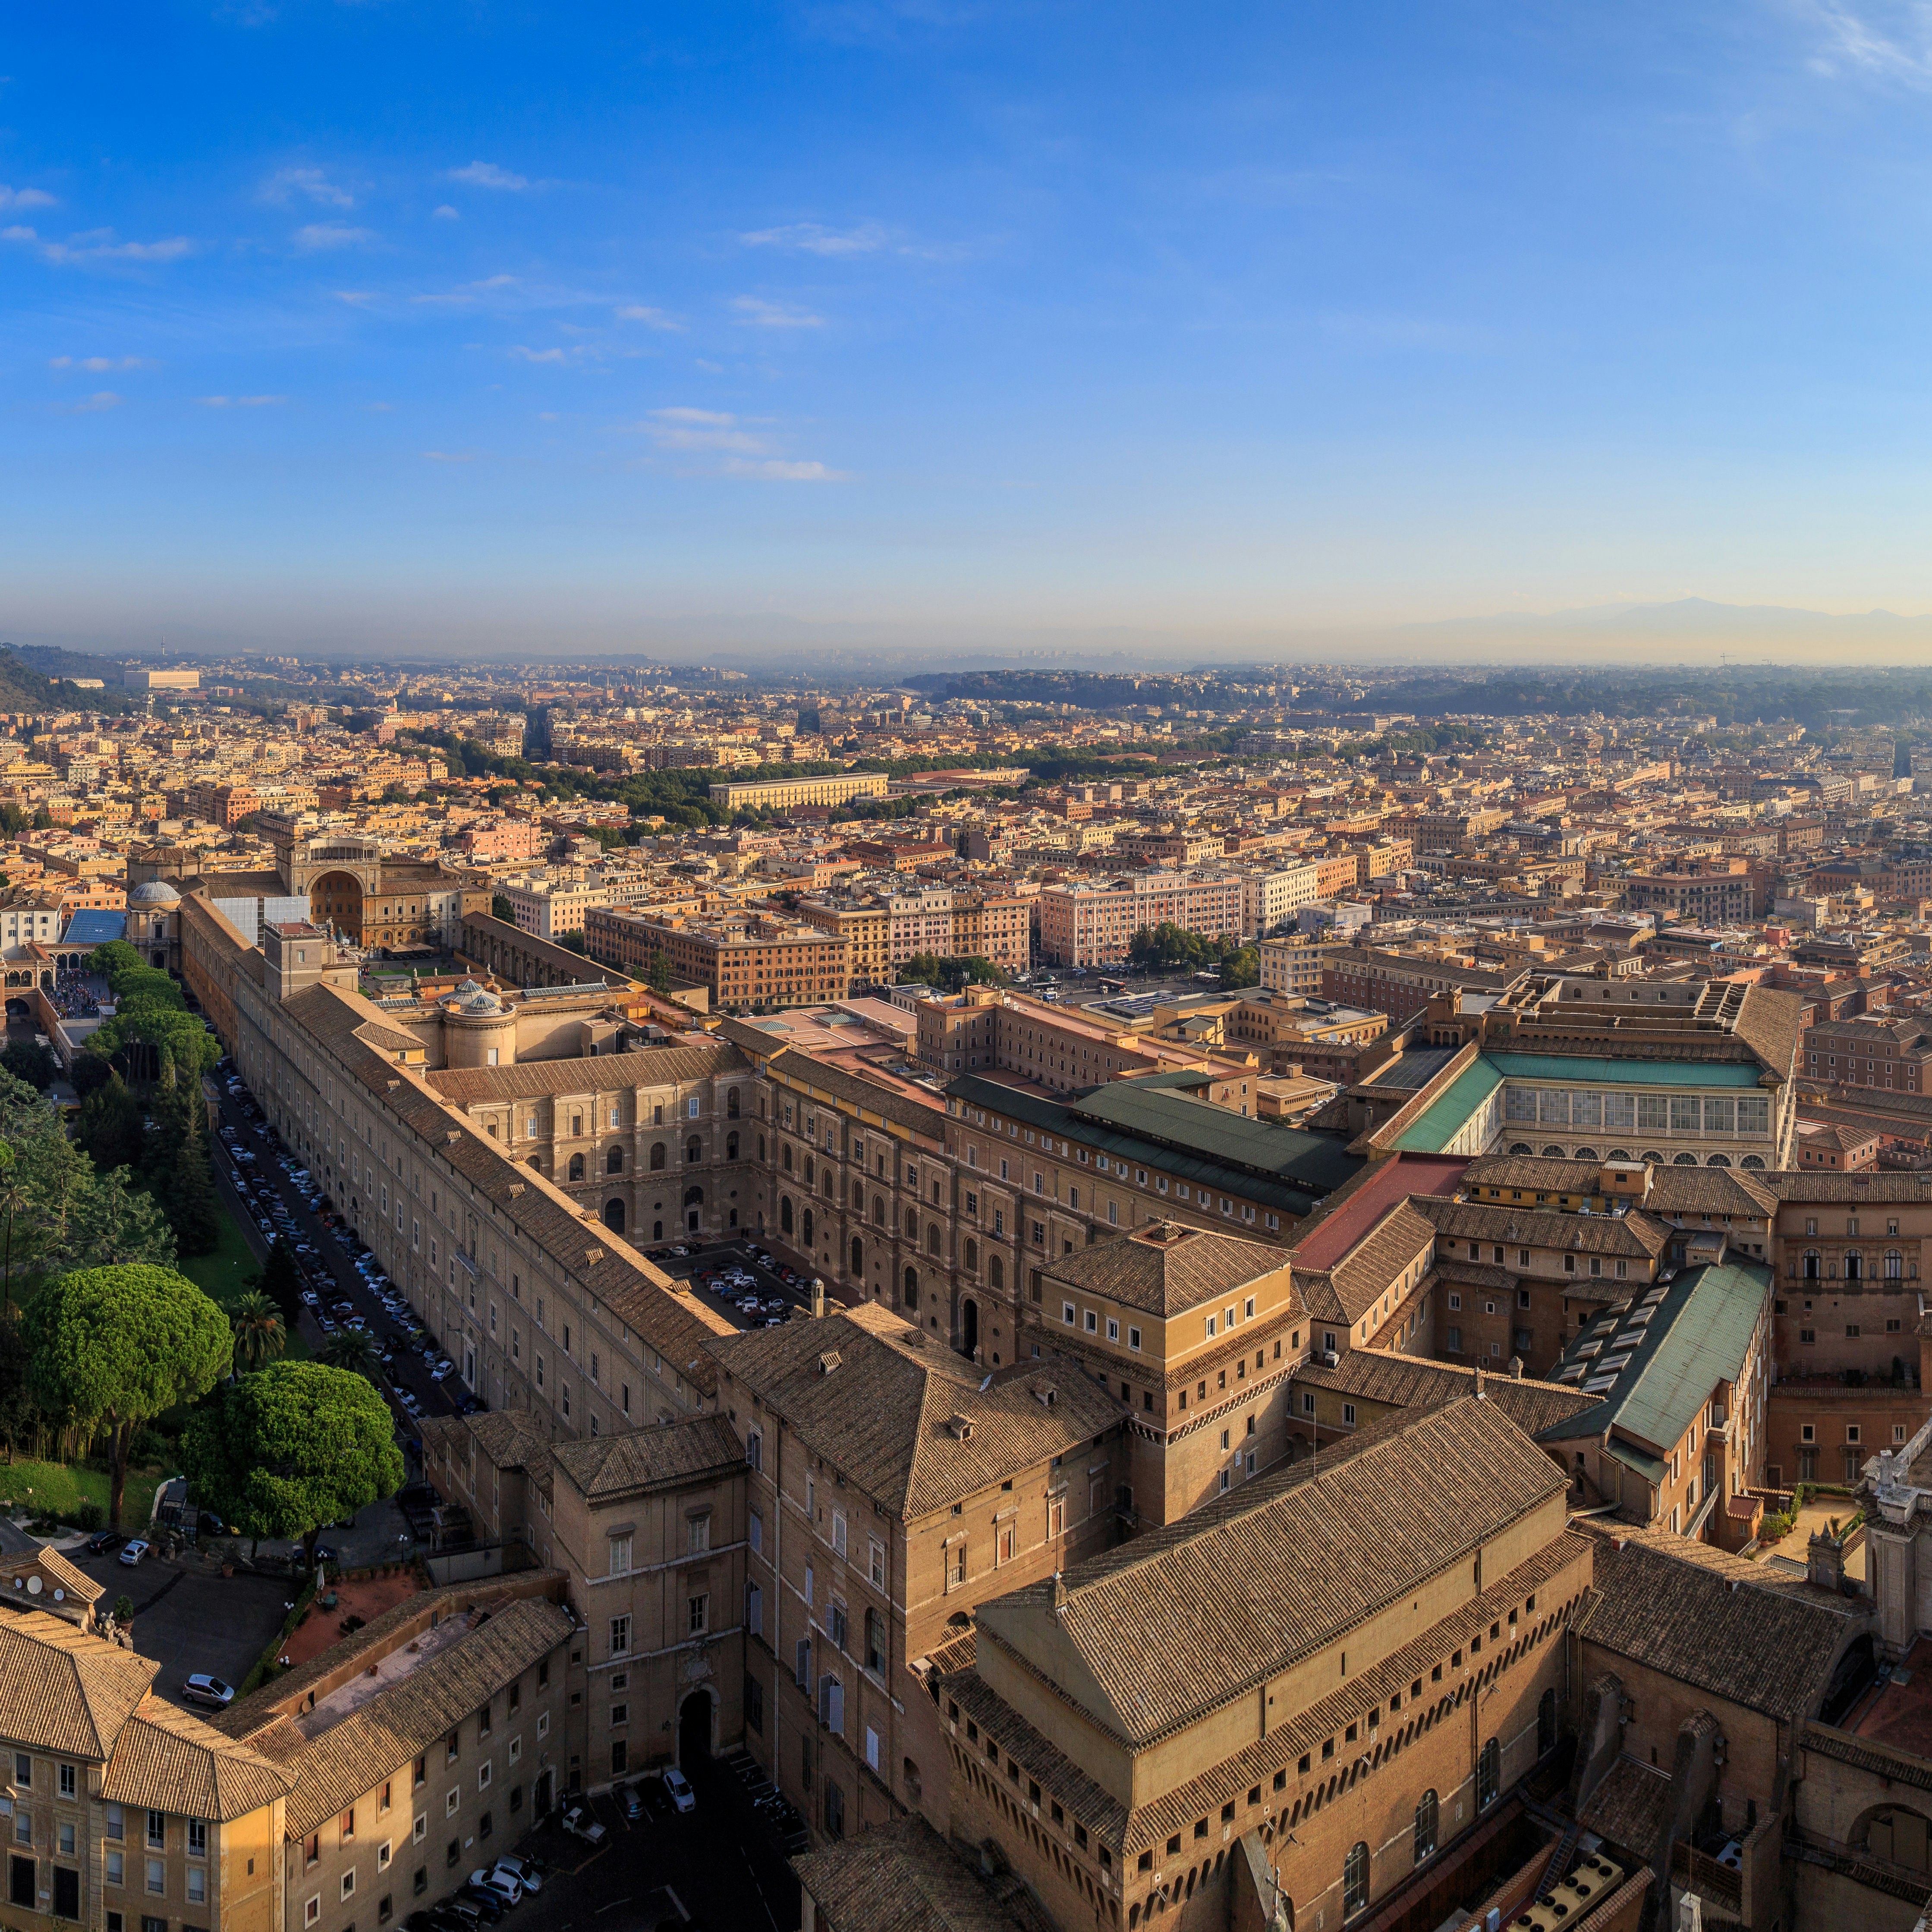 Aerial of the Sistine Chapel and the Vatican in Rome, as seen from the dome of St. Peter